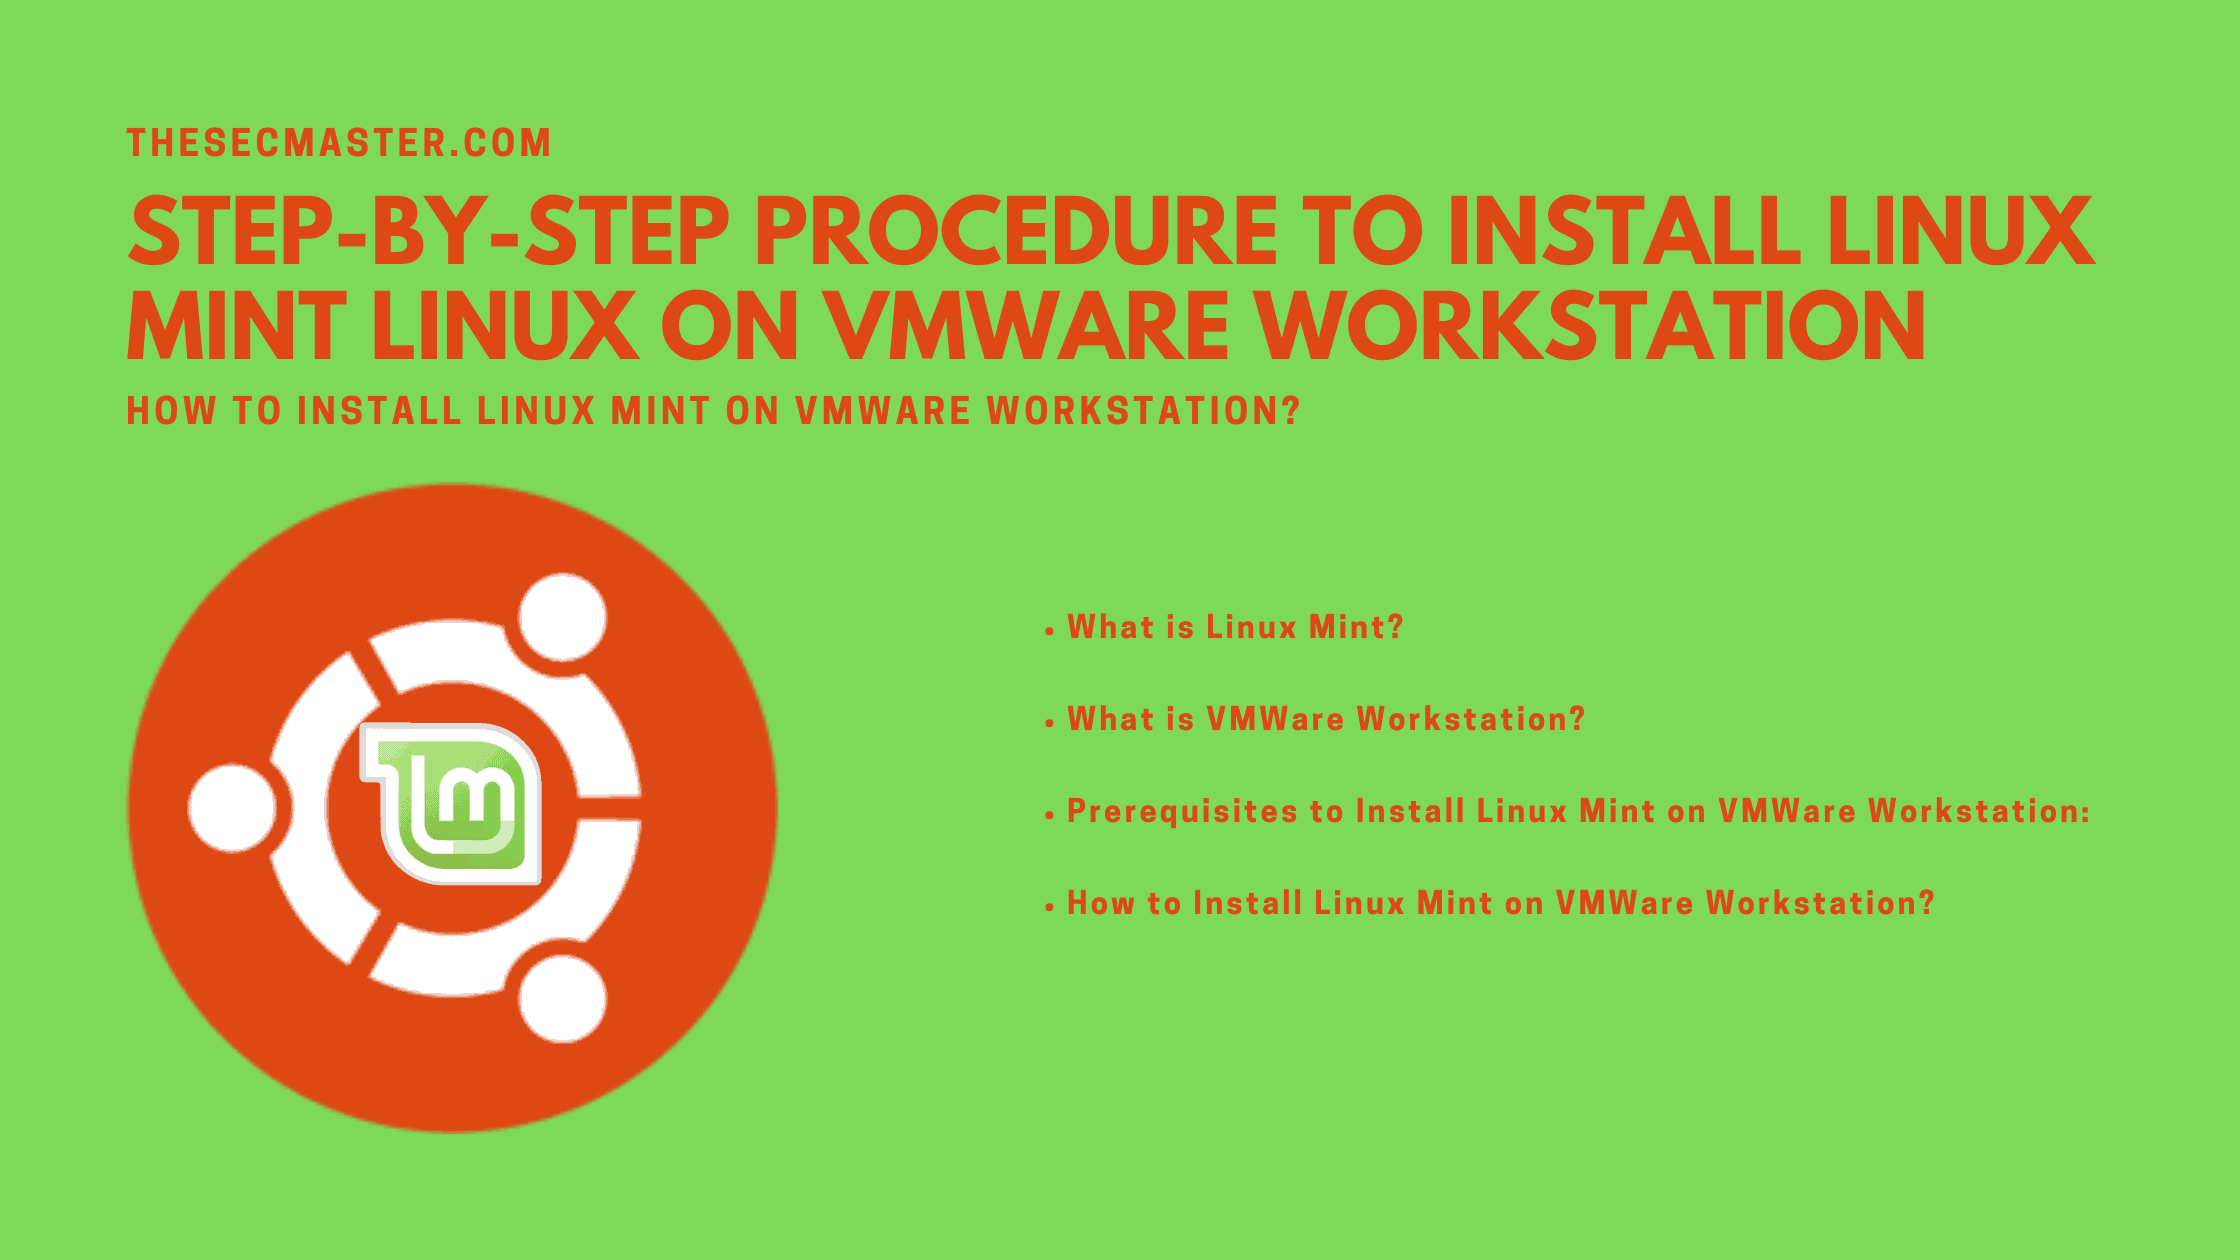 Step By Step Procedure To Install Linux Mint Linux On Vmware Workstation